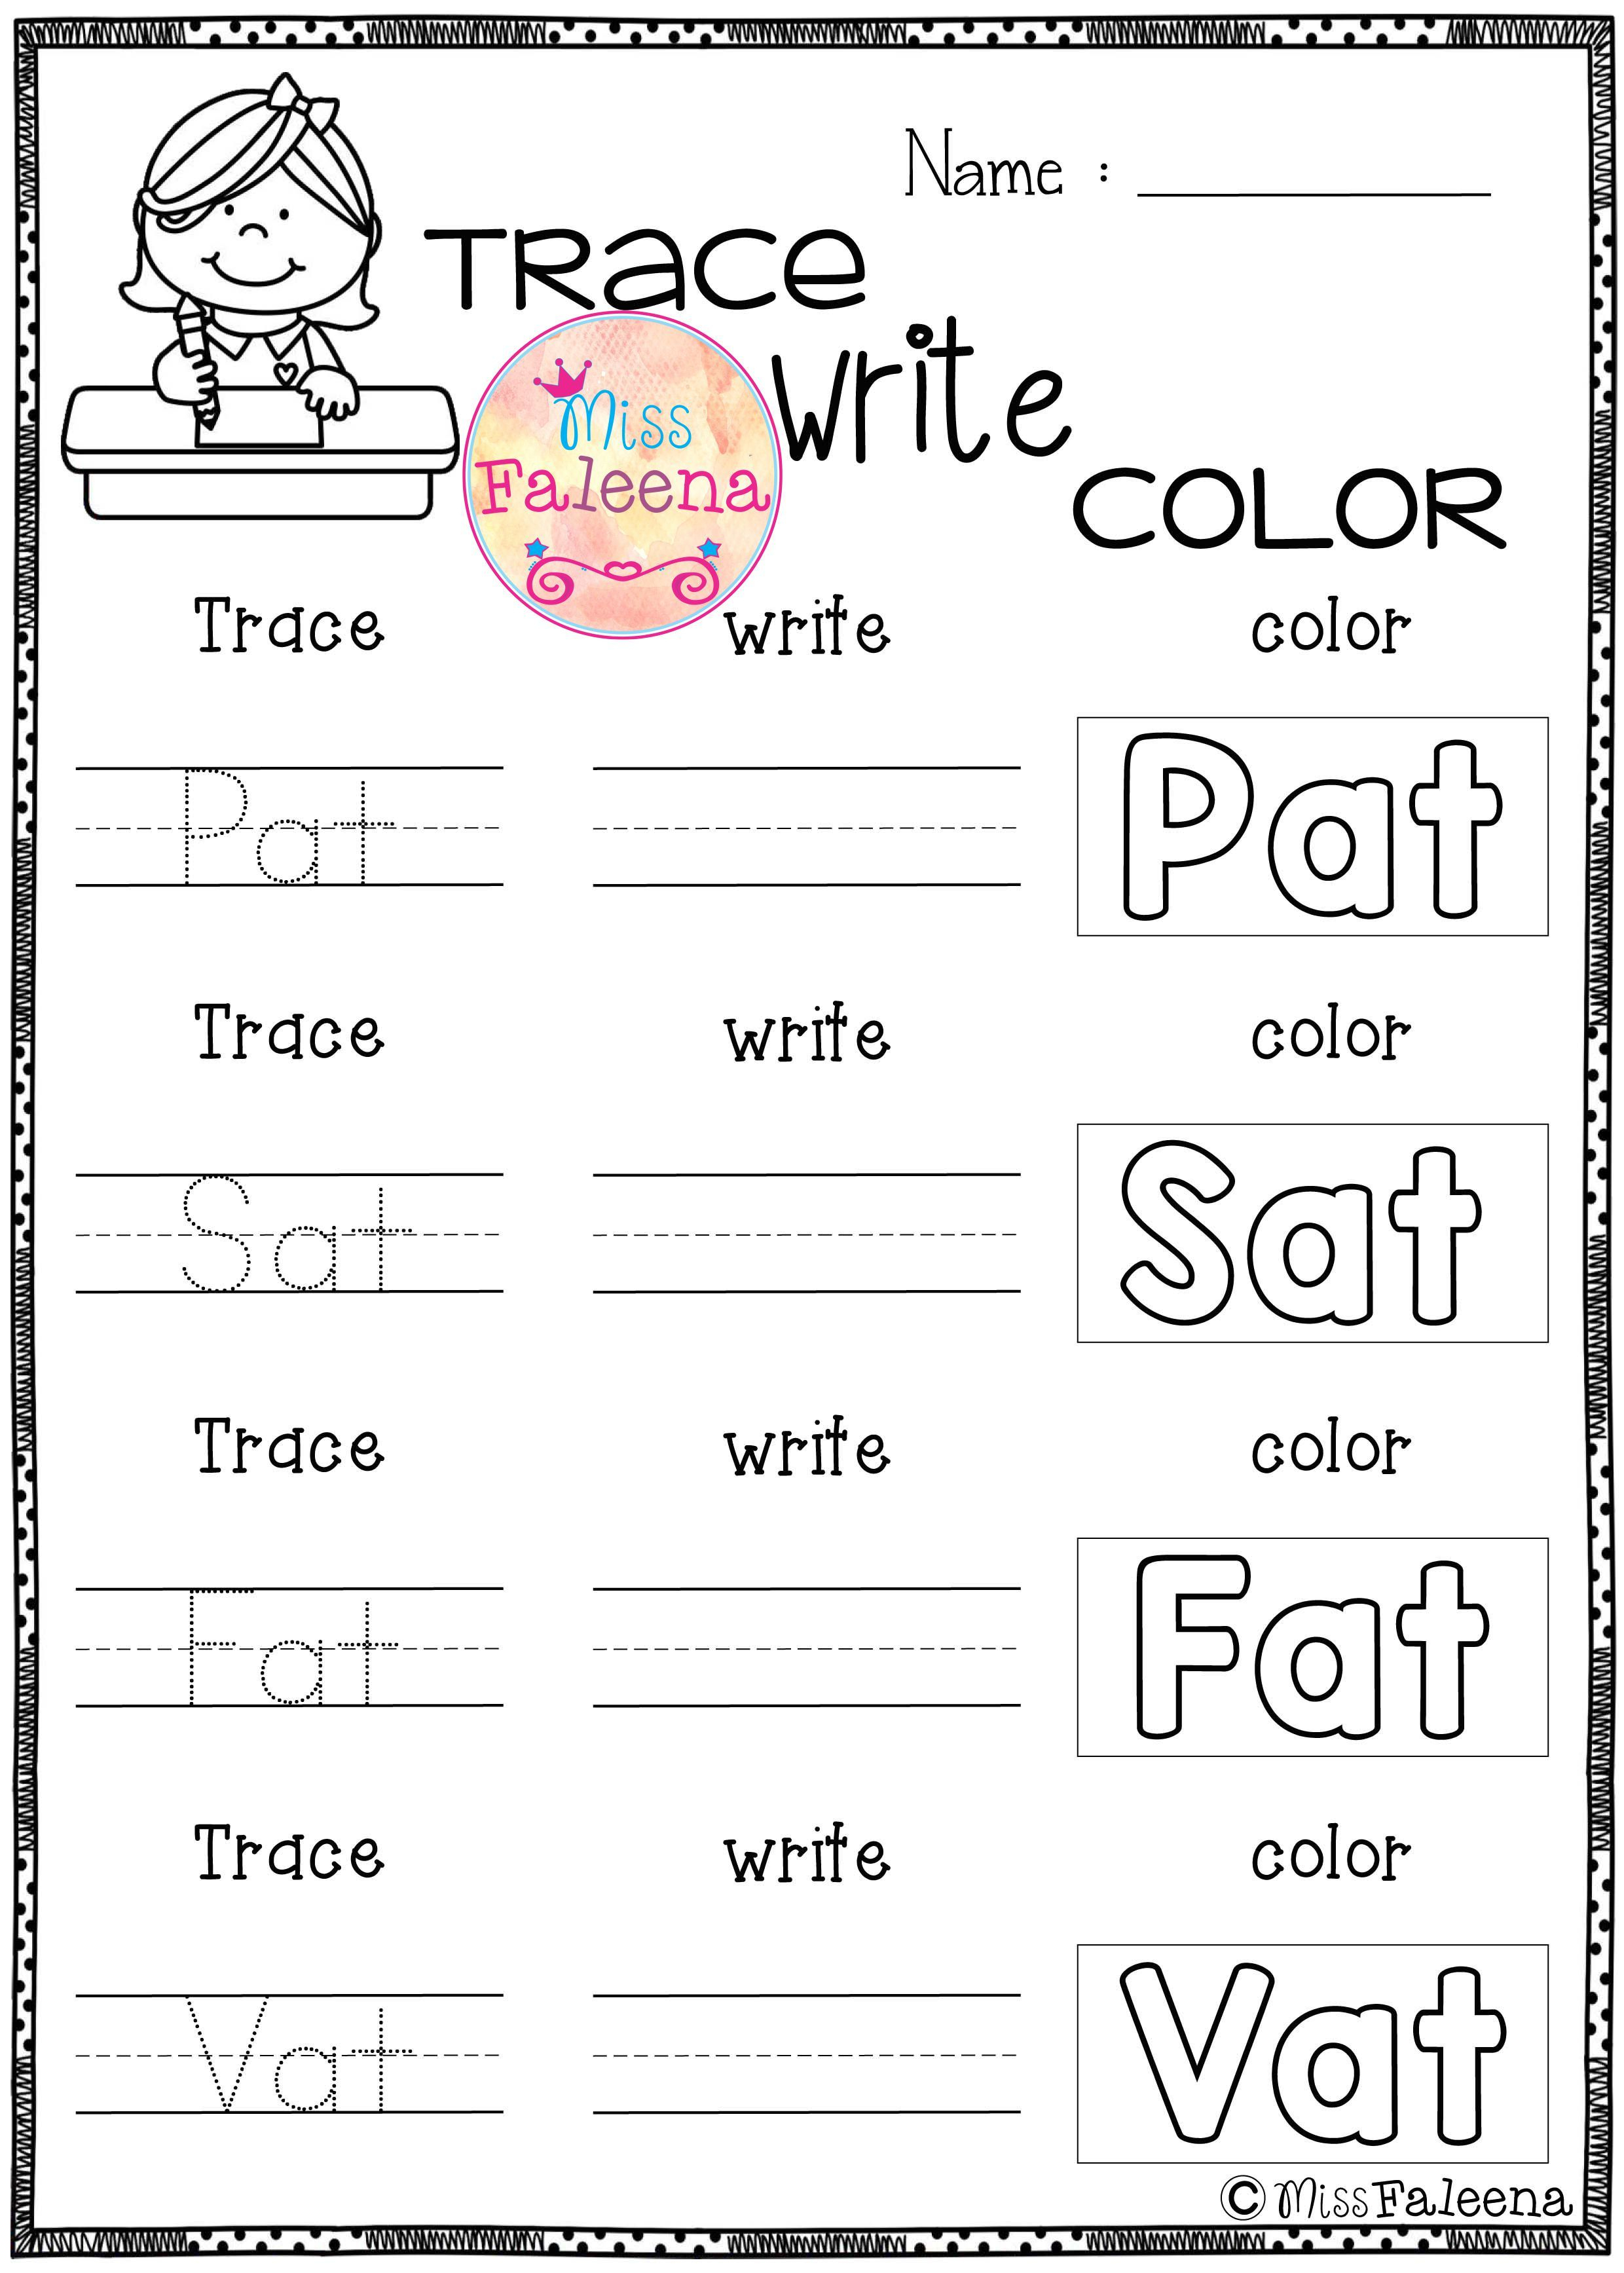 Cvc Words Short A Exercise This Product Is Designed To Help Teach - Cvc Words Worksheets Free Printable